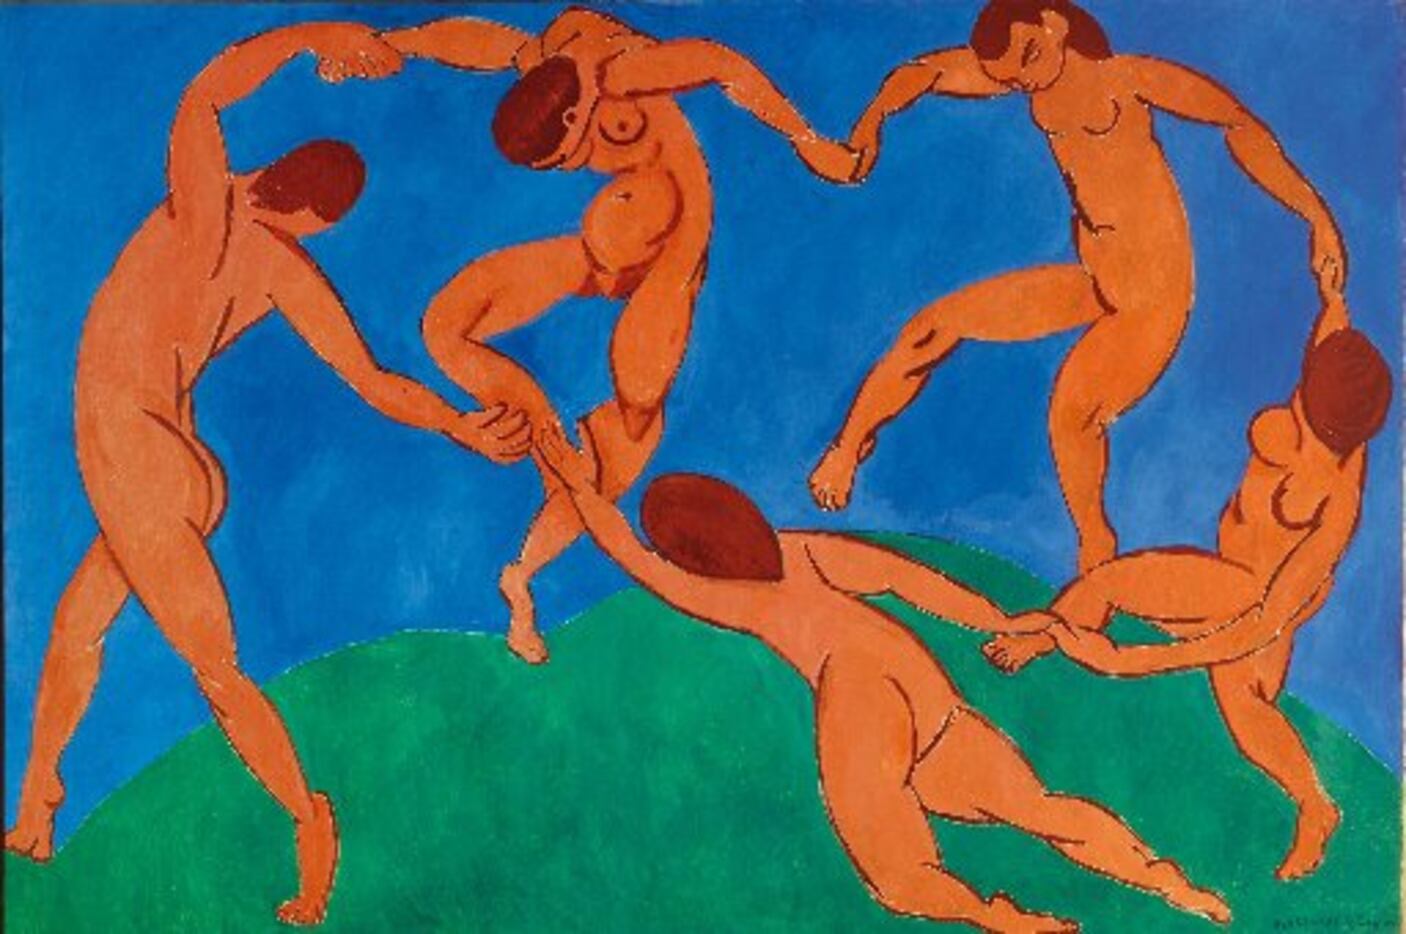 The Dance by Henri Matisse is a 260 x 391 oil on canvas painted in 1910 